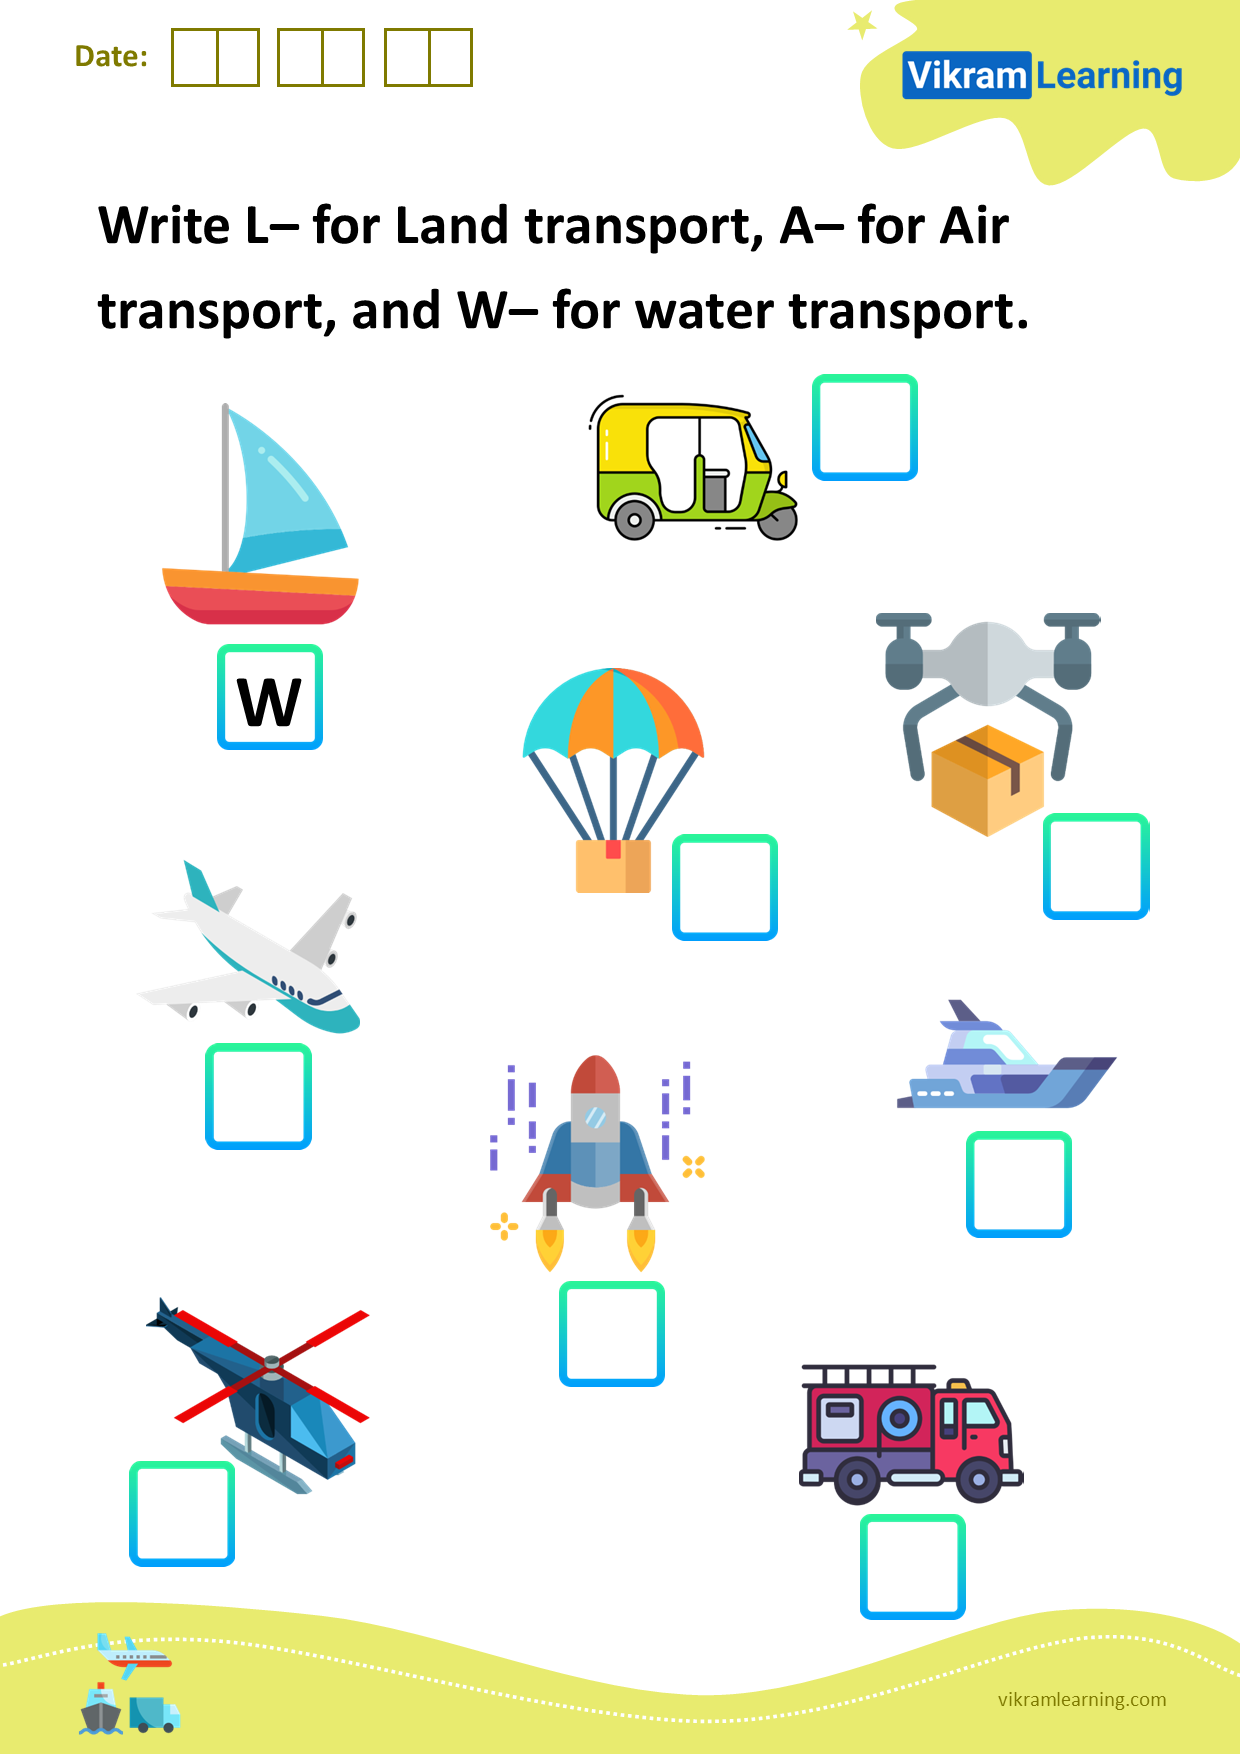 Download write l– for land transport, a– for air transport, and w– for water transport worksheets